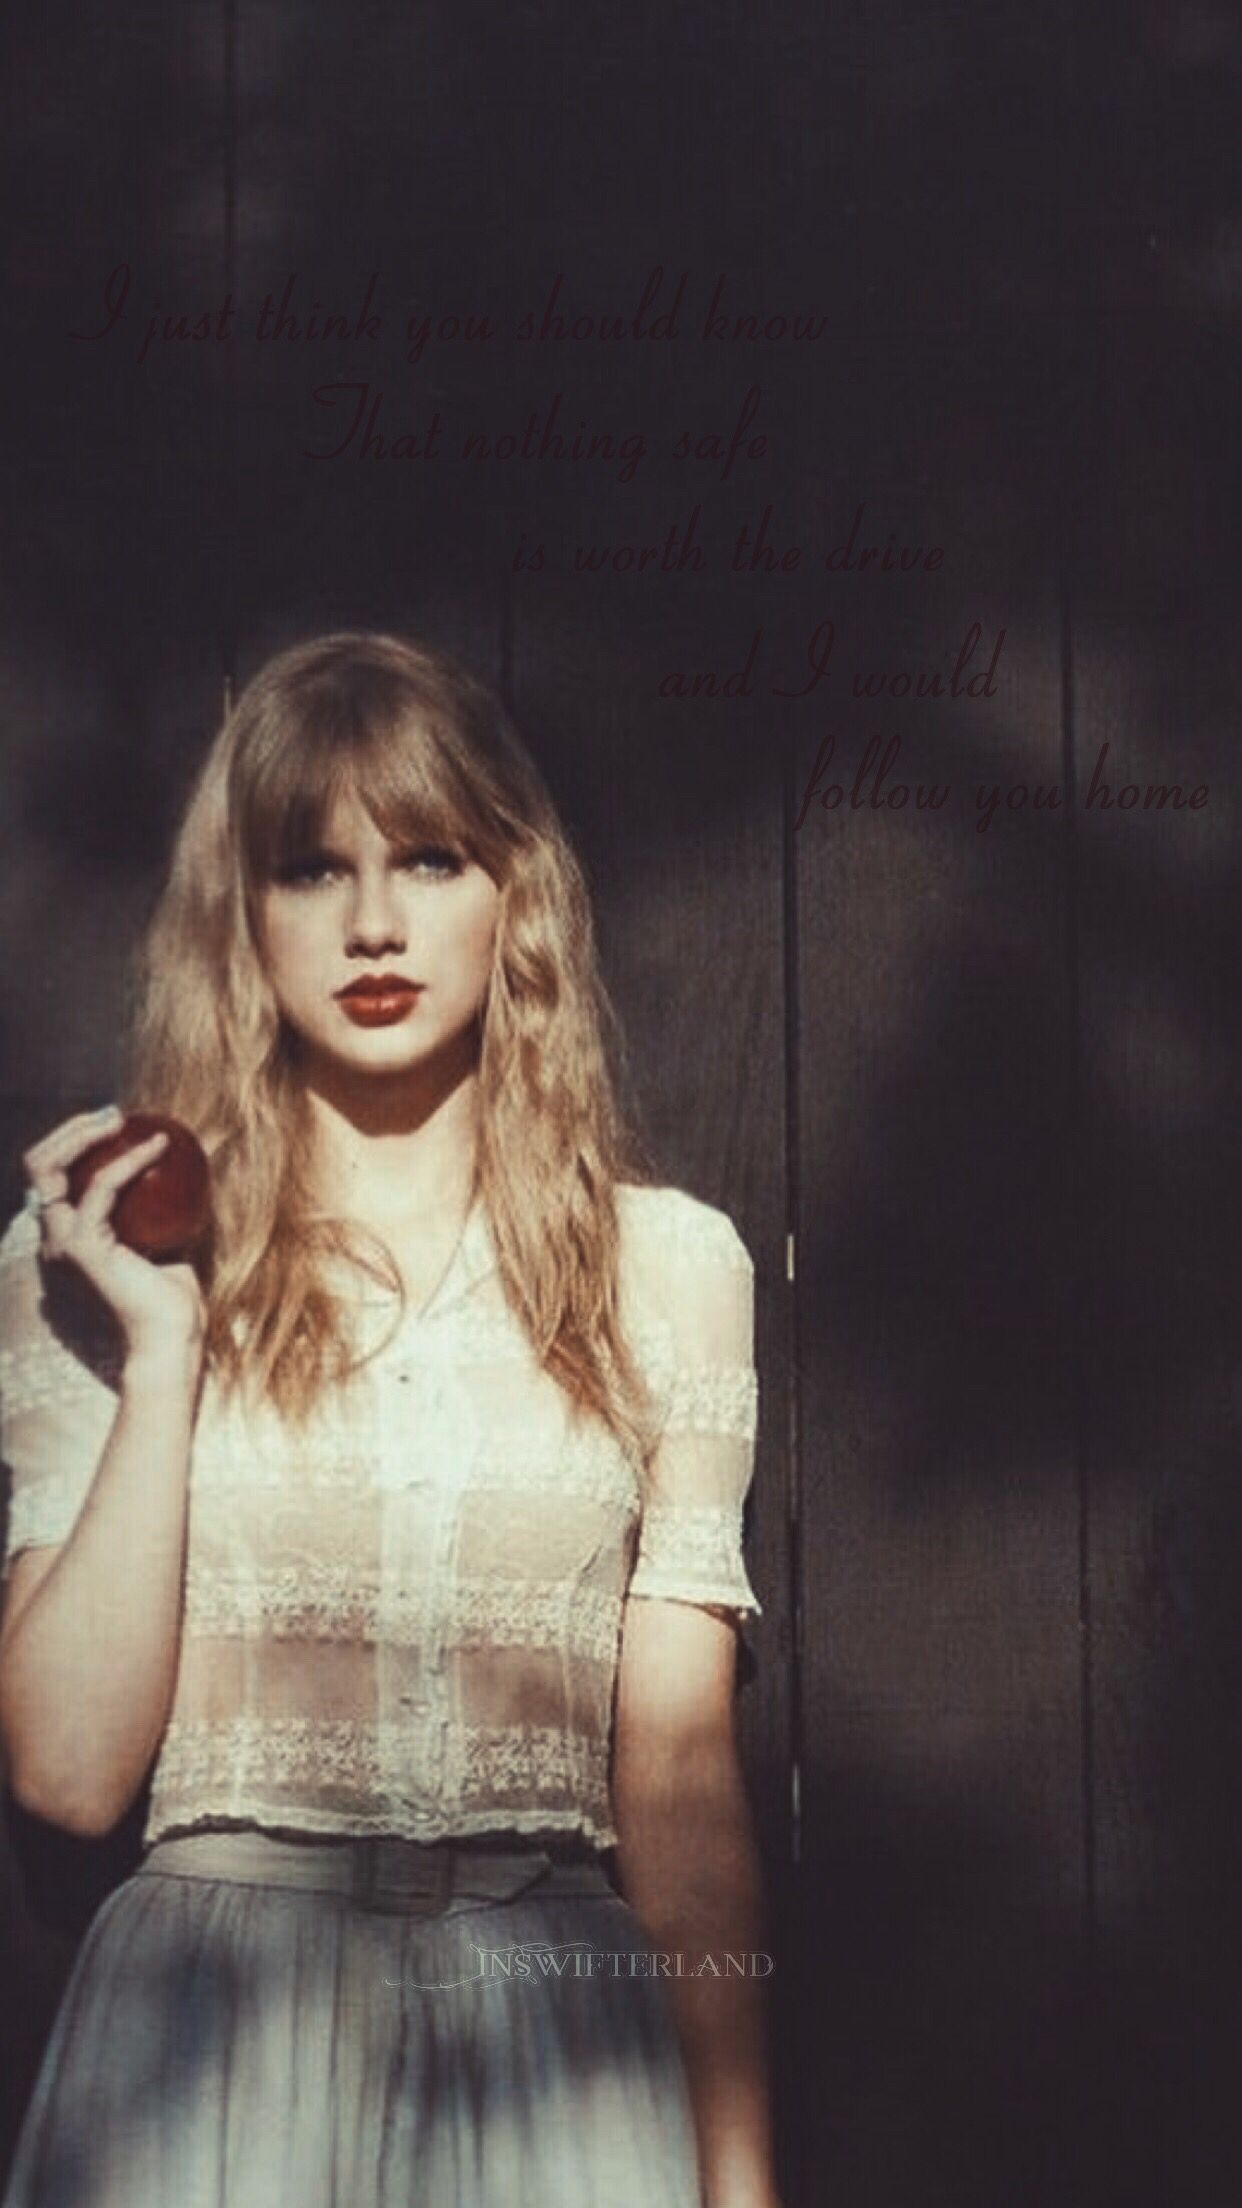 Taylor Swift Wallpaper. Taylor swift red, Taylor alison swift, Taylor swift wallpaper